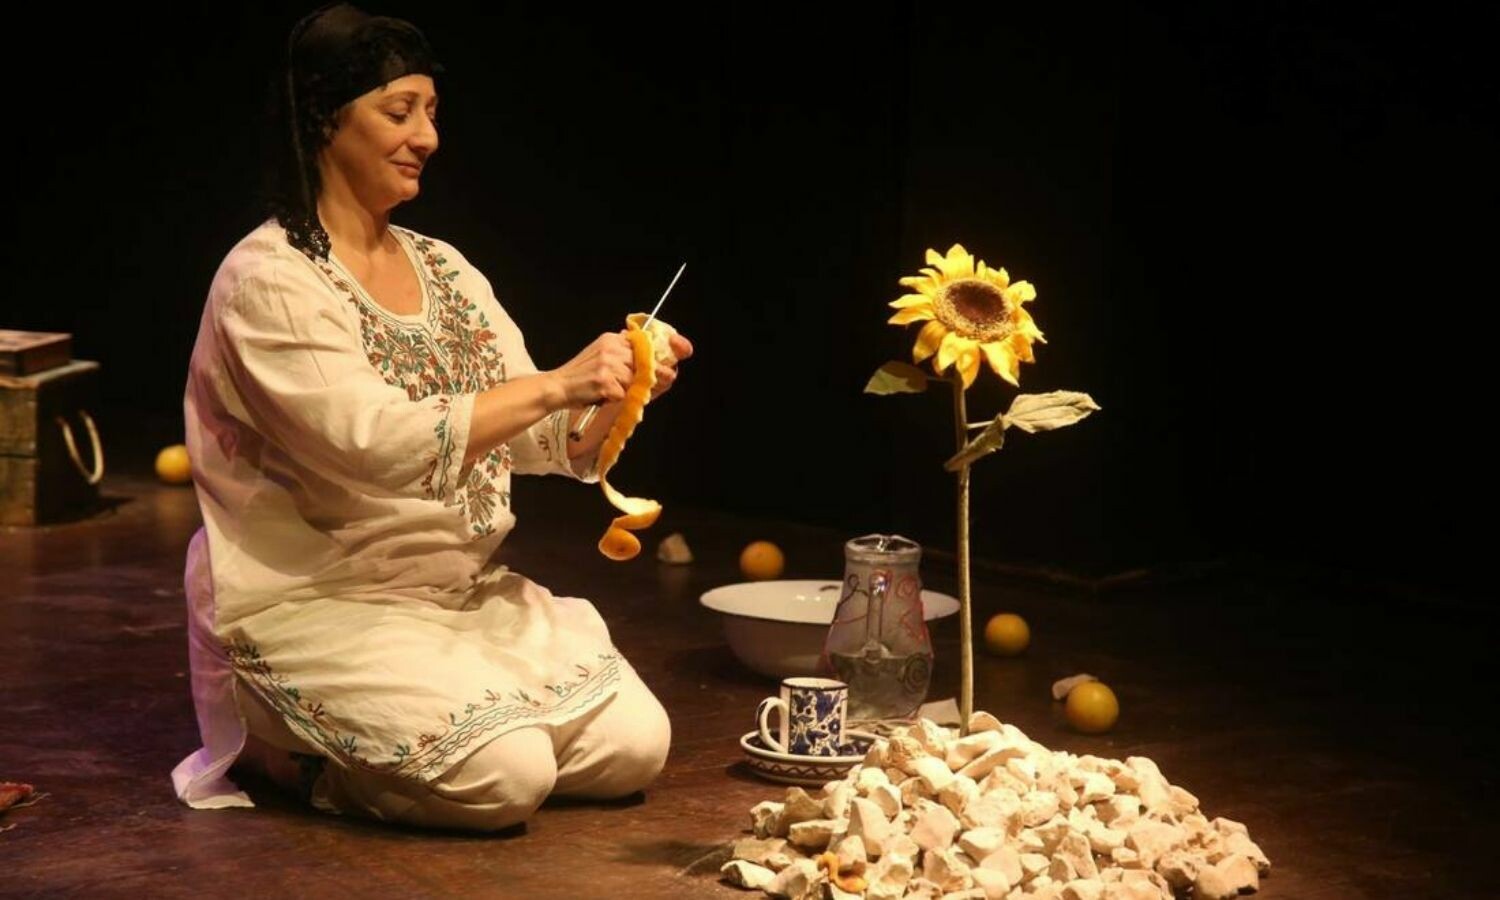 A woman dressed in white kneeling on the floor and cutting off the peel of an orange. She sits in front of one sunflower.